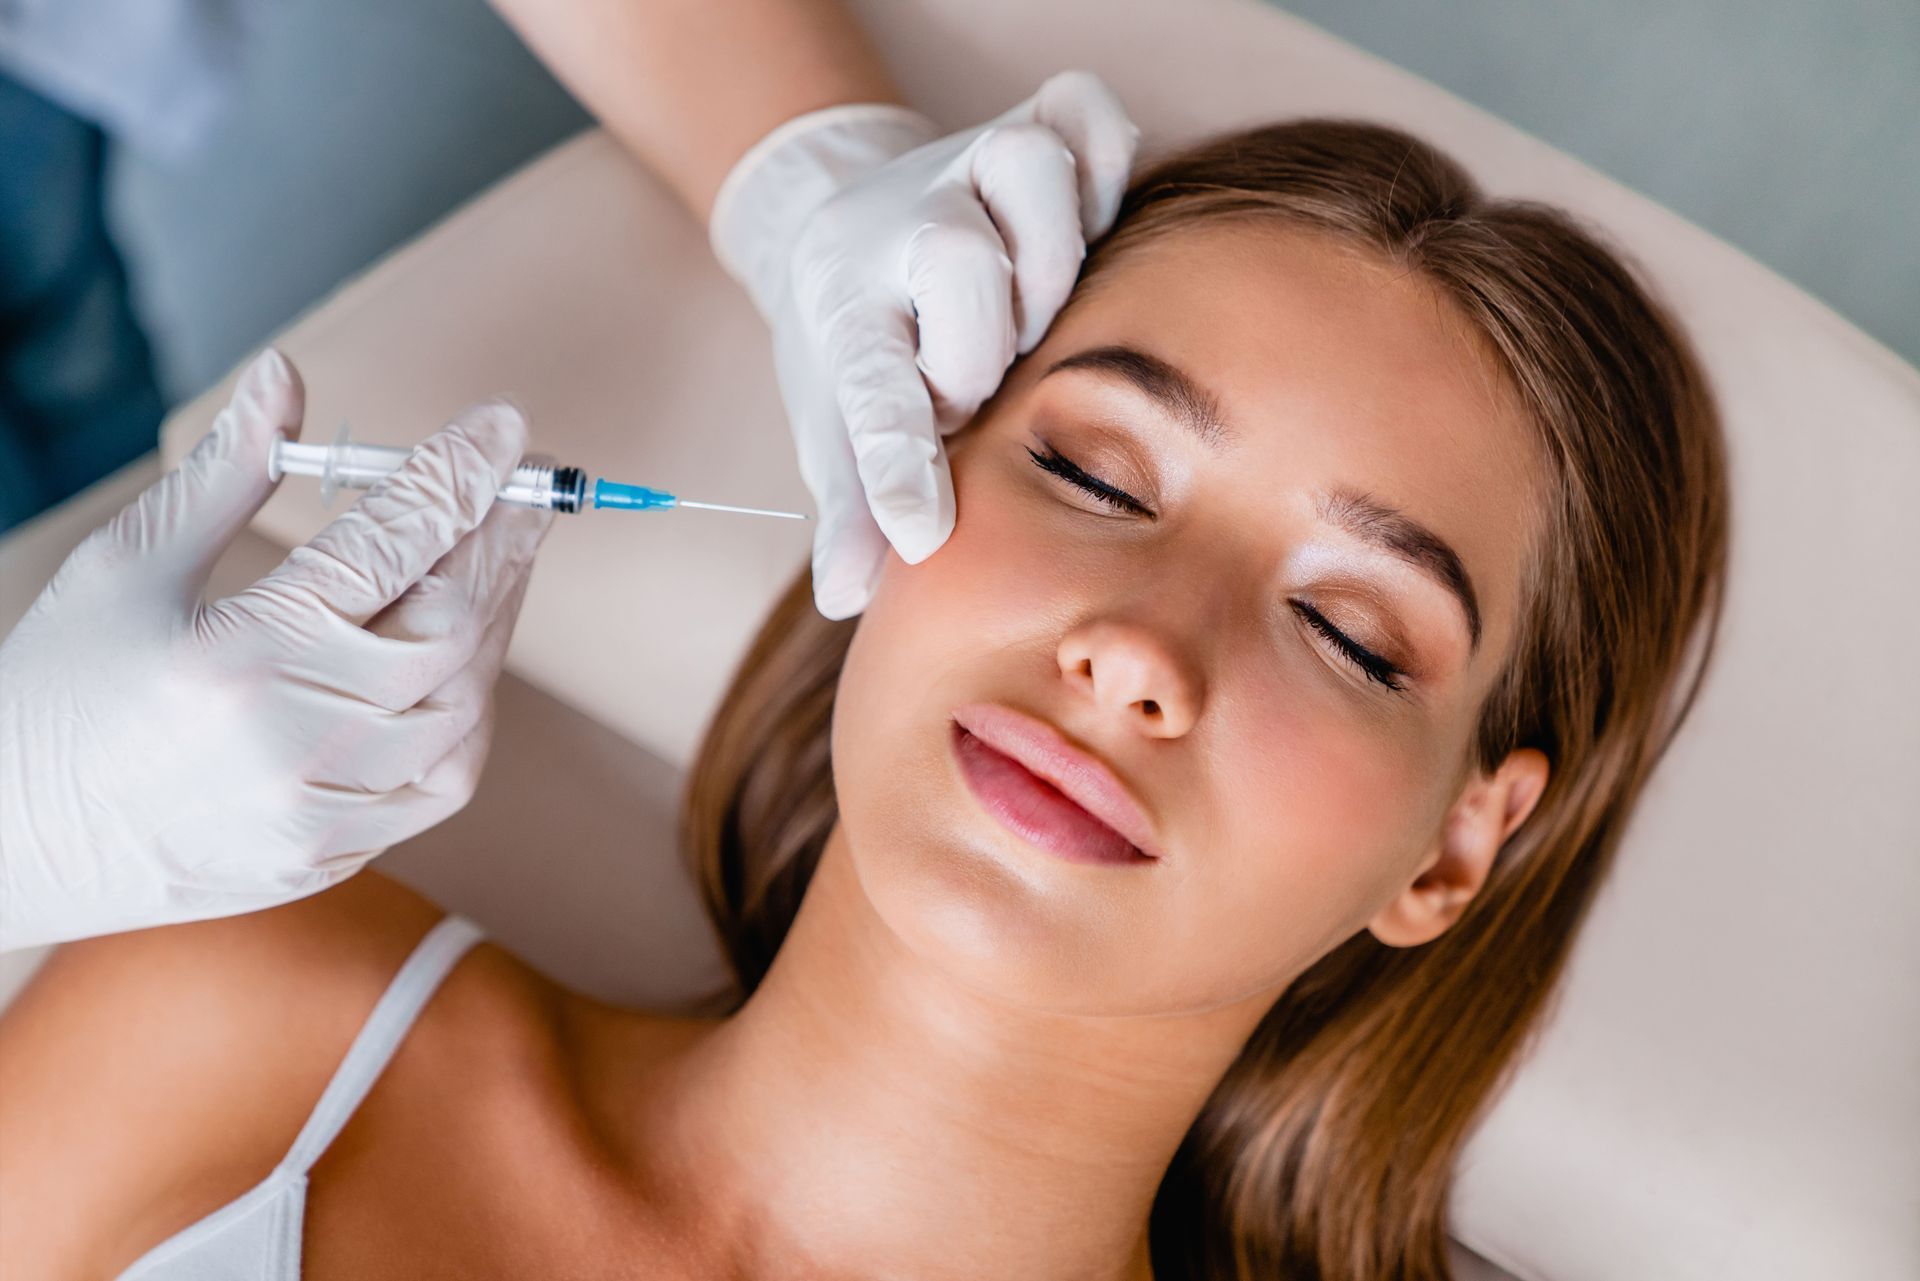 BOTOX® 101: Everything You Need to Know Before Your First Treatment